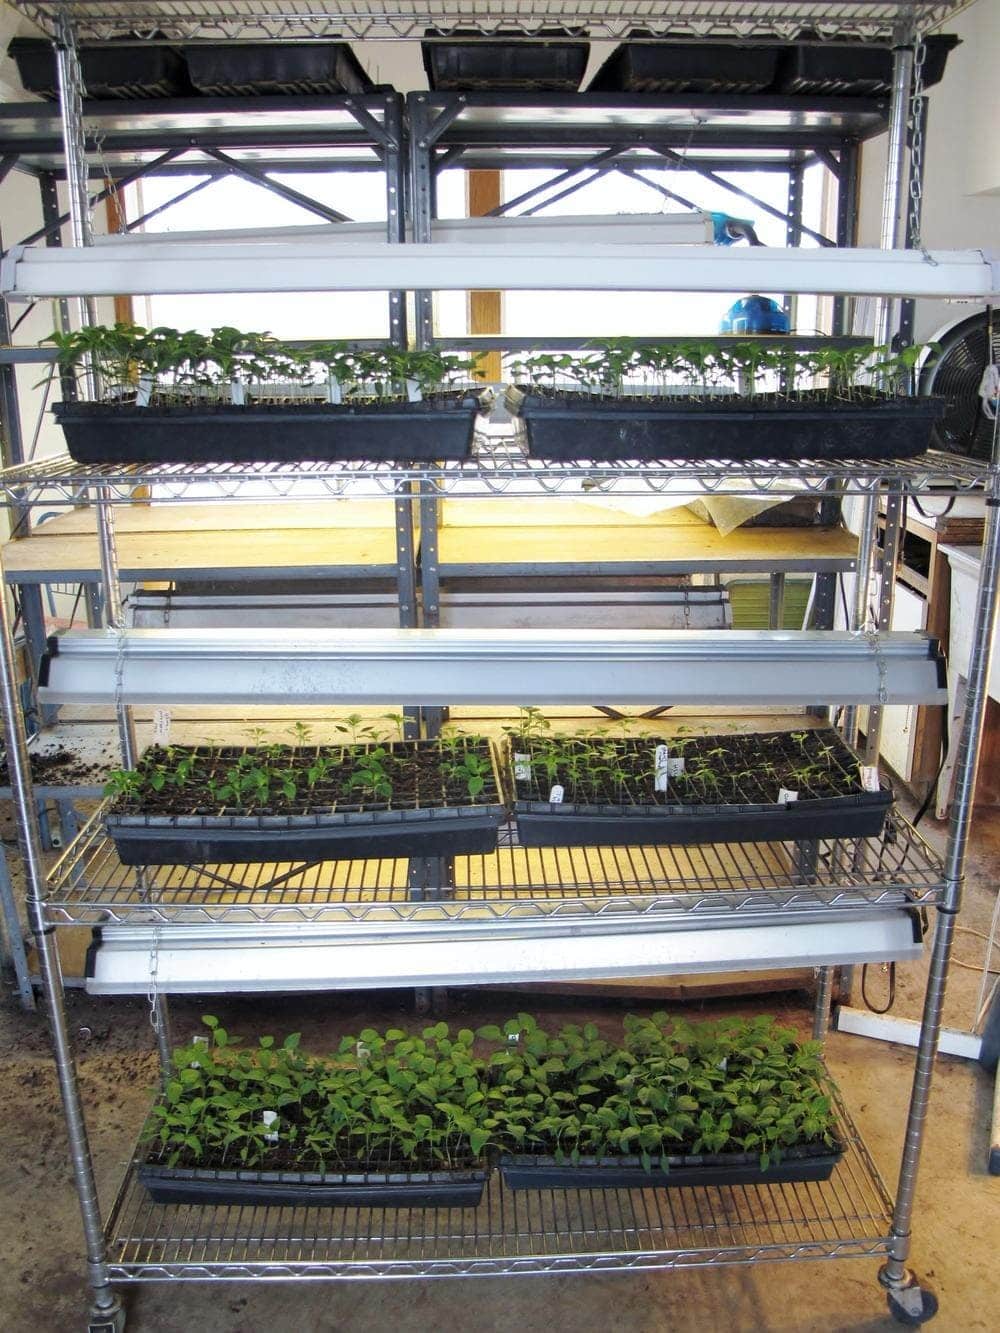 An indoor seed starting set. A shelving unit with many fluorescent grow lights hanging above trays of young seedlings.